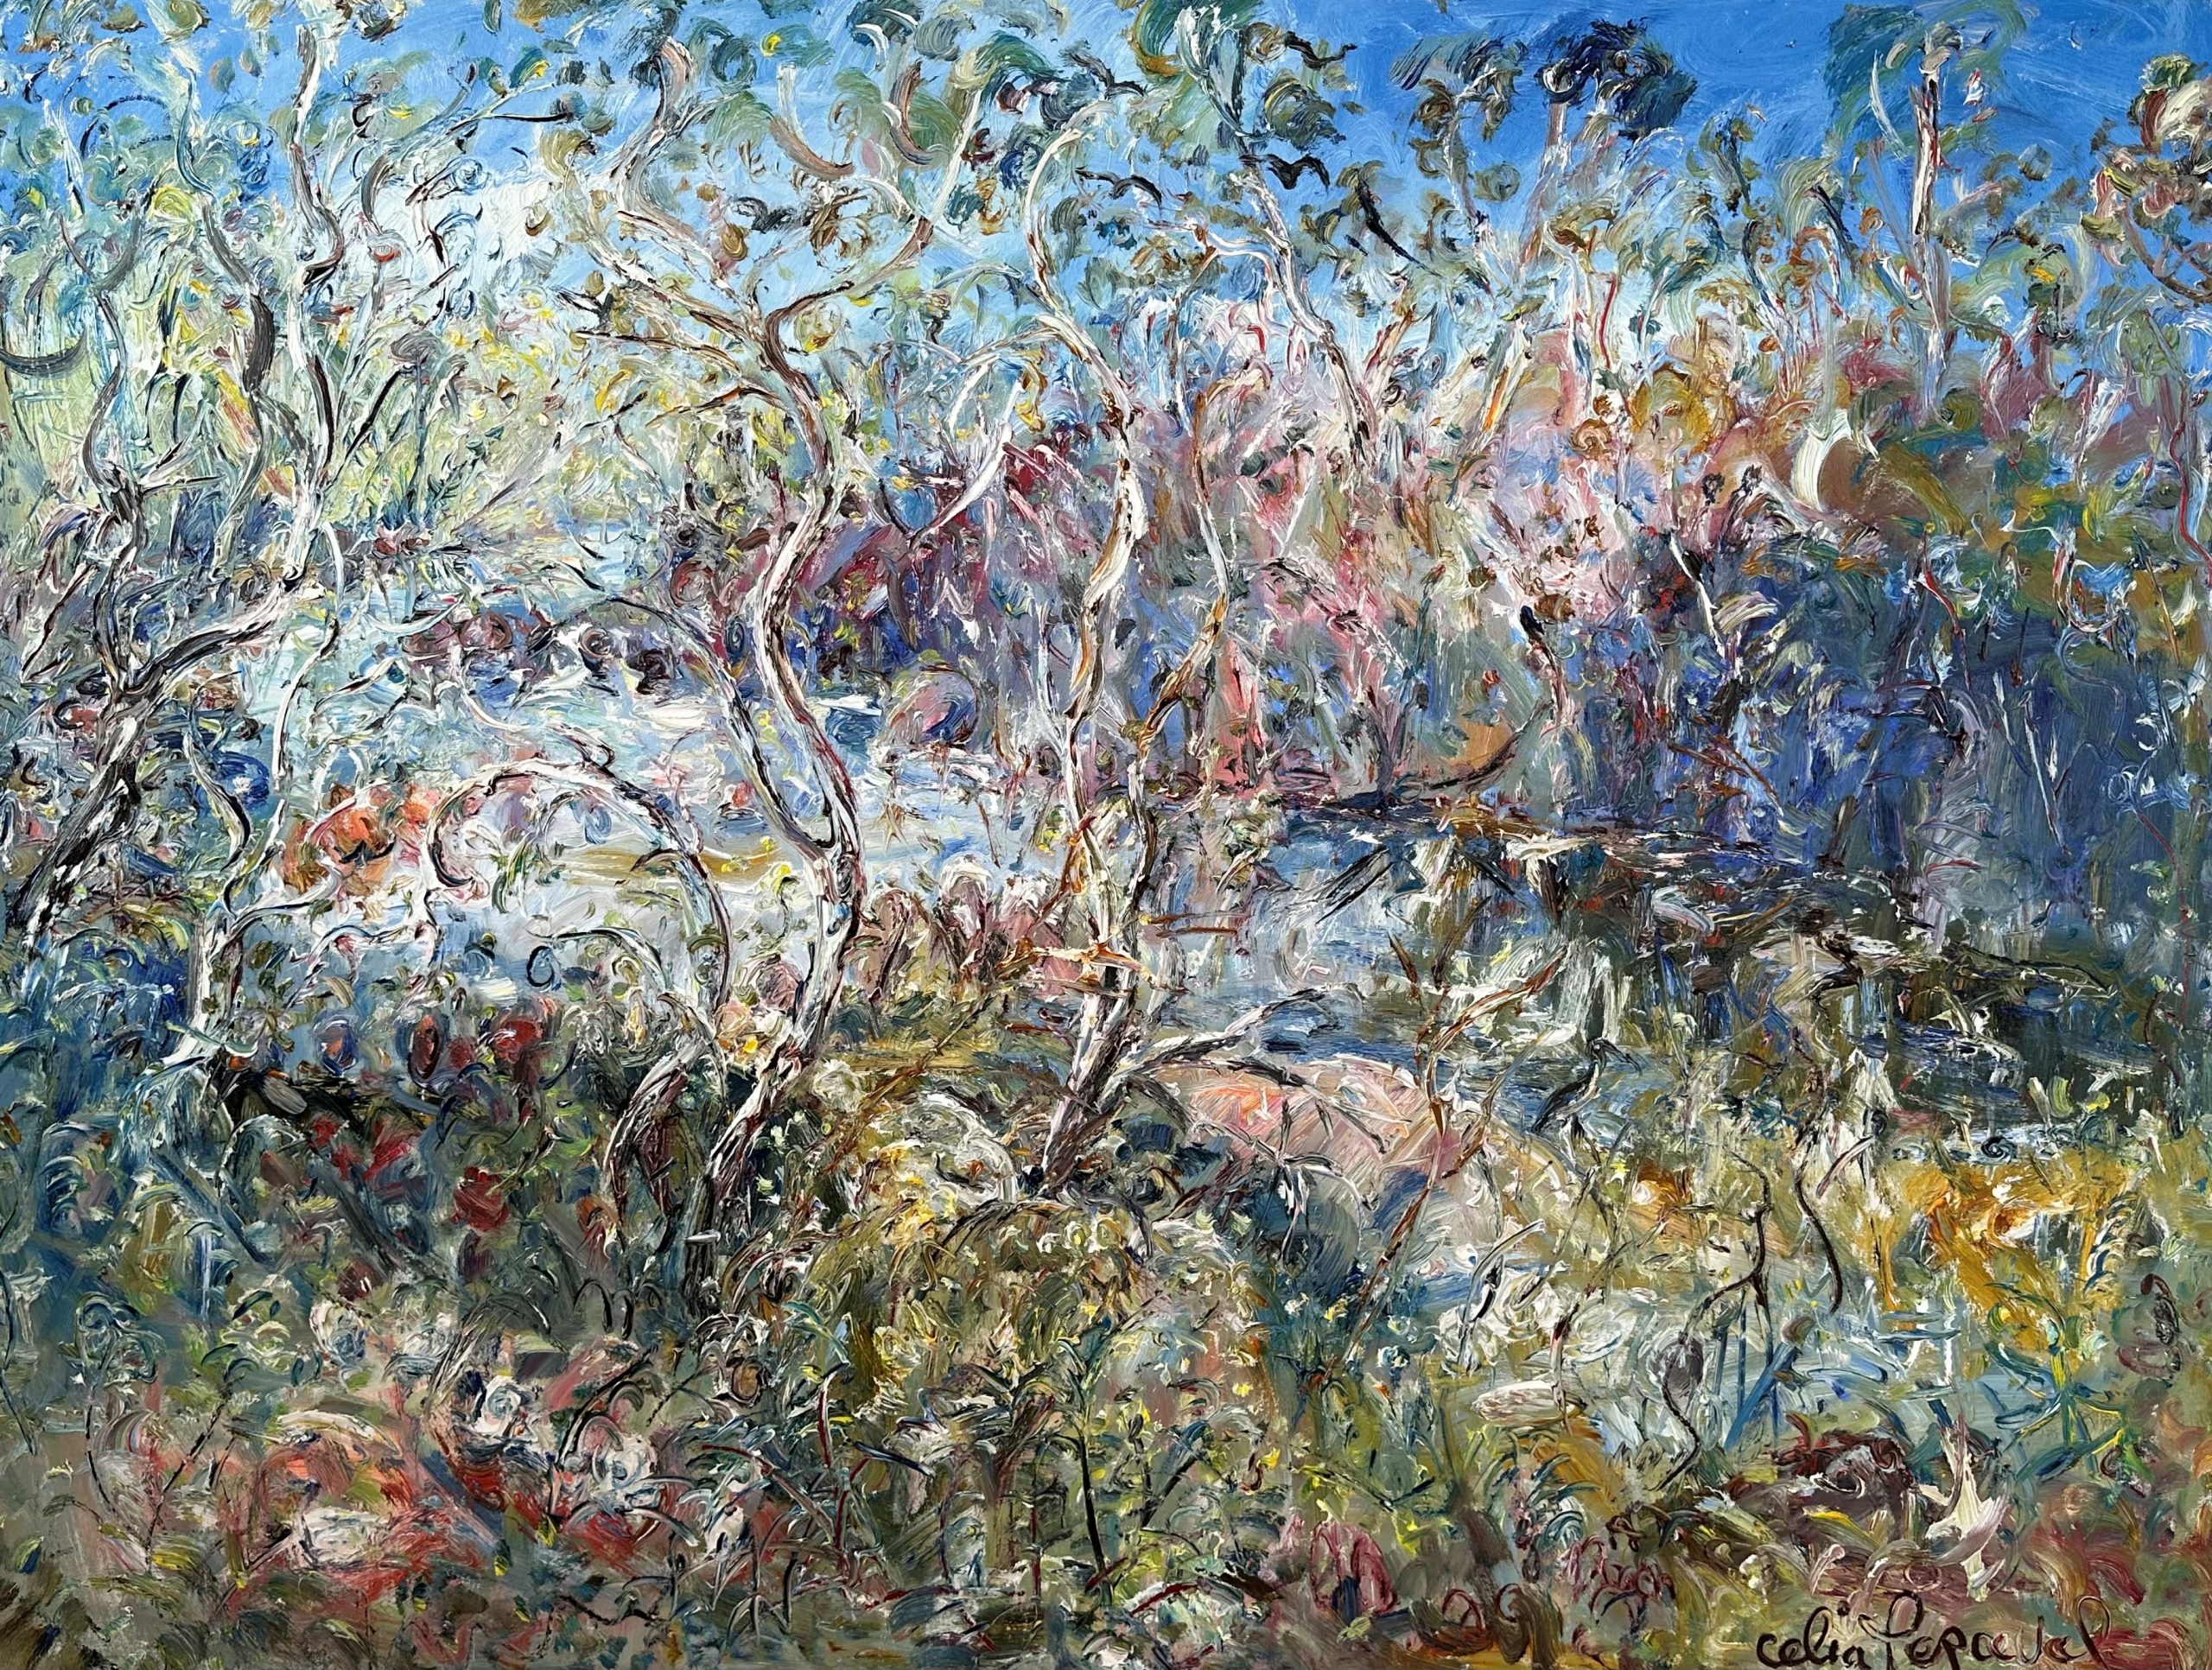 Celia Perceval 'Wildflowers and Ibis in the Upper Shoalhaven' oil on canvas 122 x 160cm $35,000